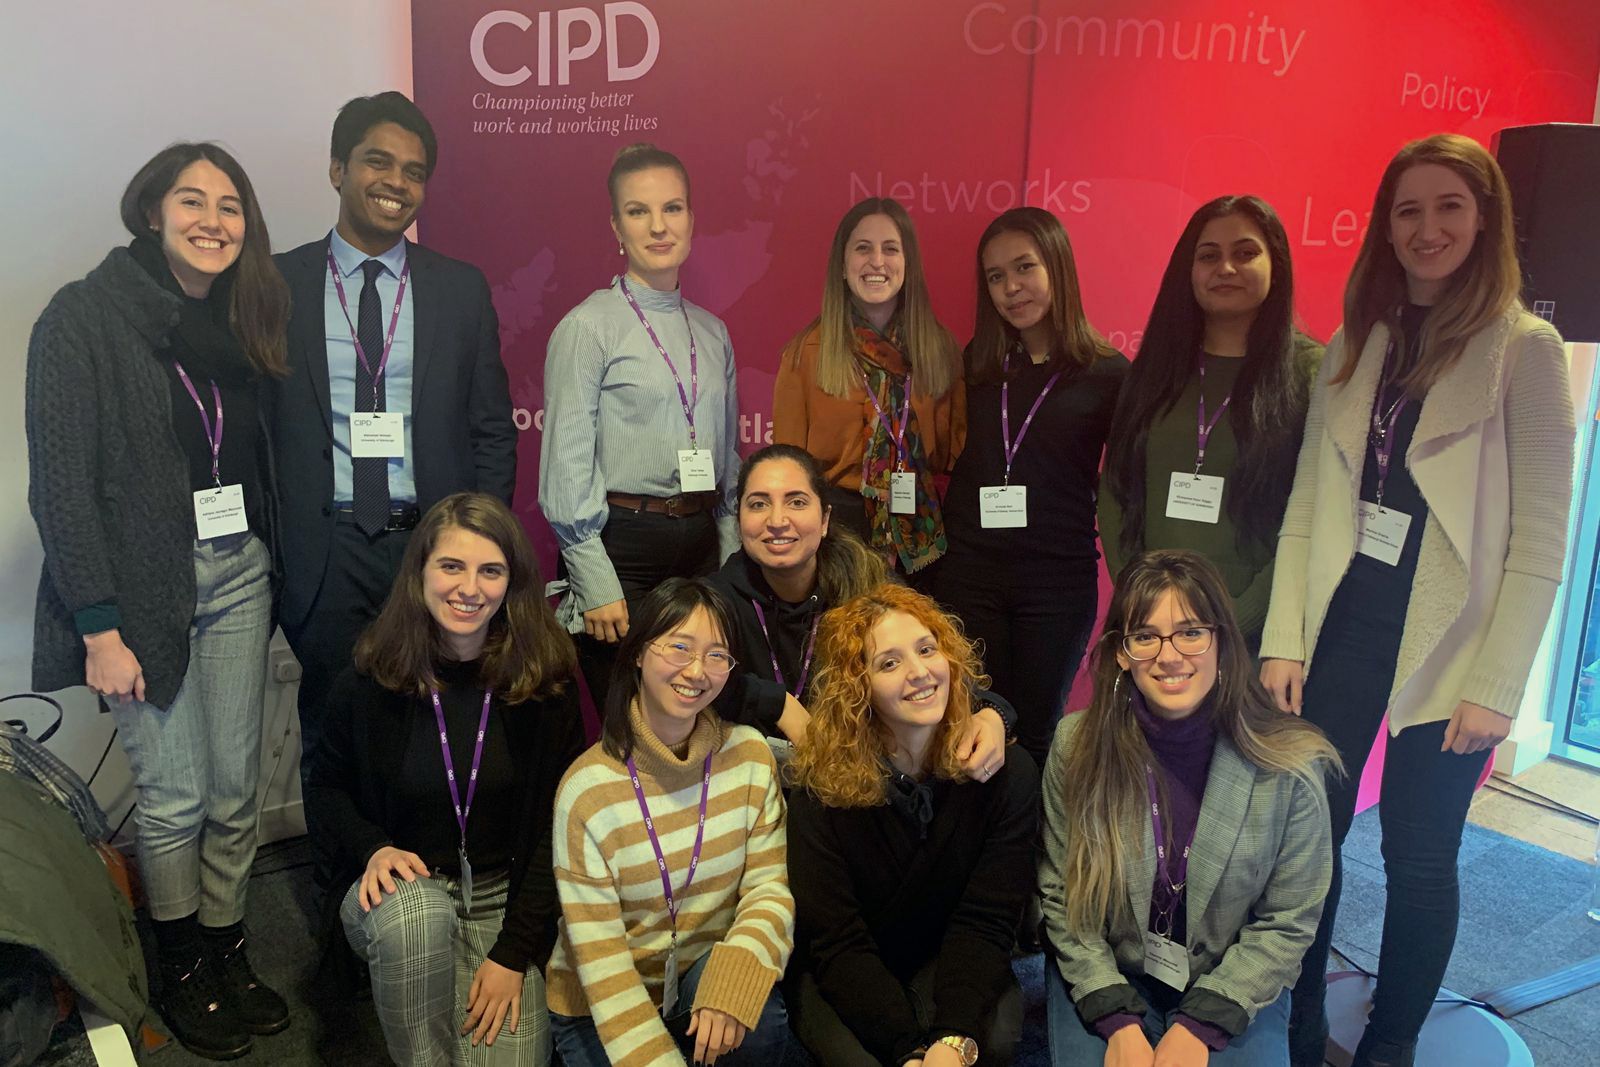 The CIPD Scotland Student Conference 2020